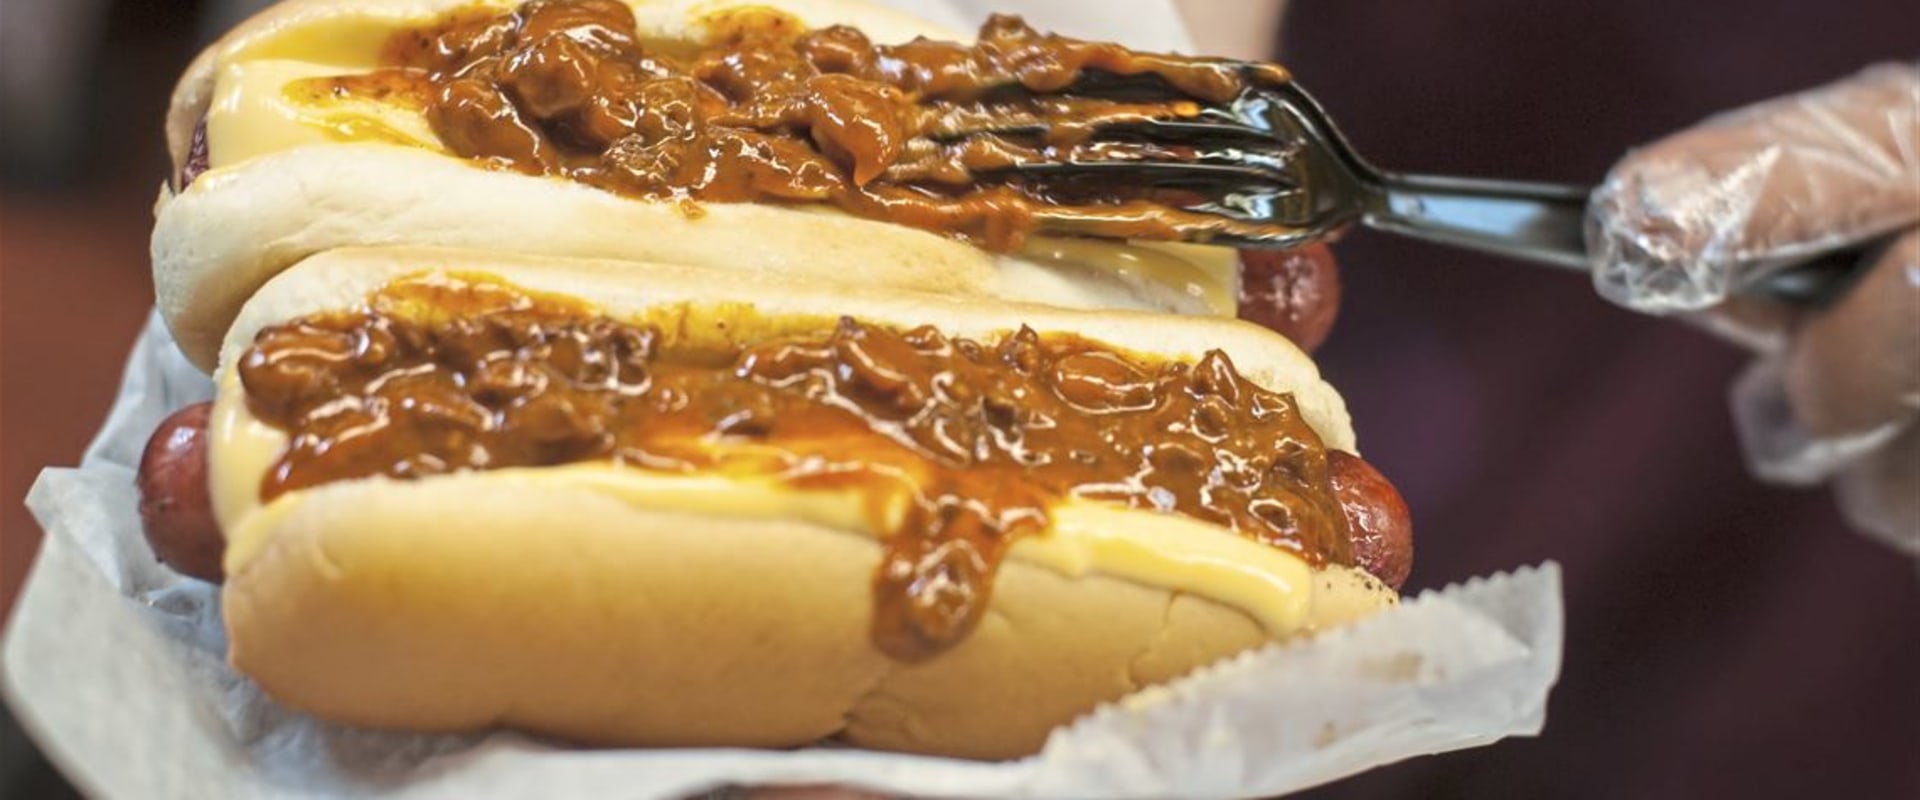 Local Flavor At Its Finest: How Lee County's Hot Dog Stand Is A Culinary Delight